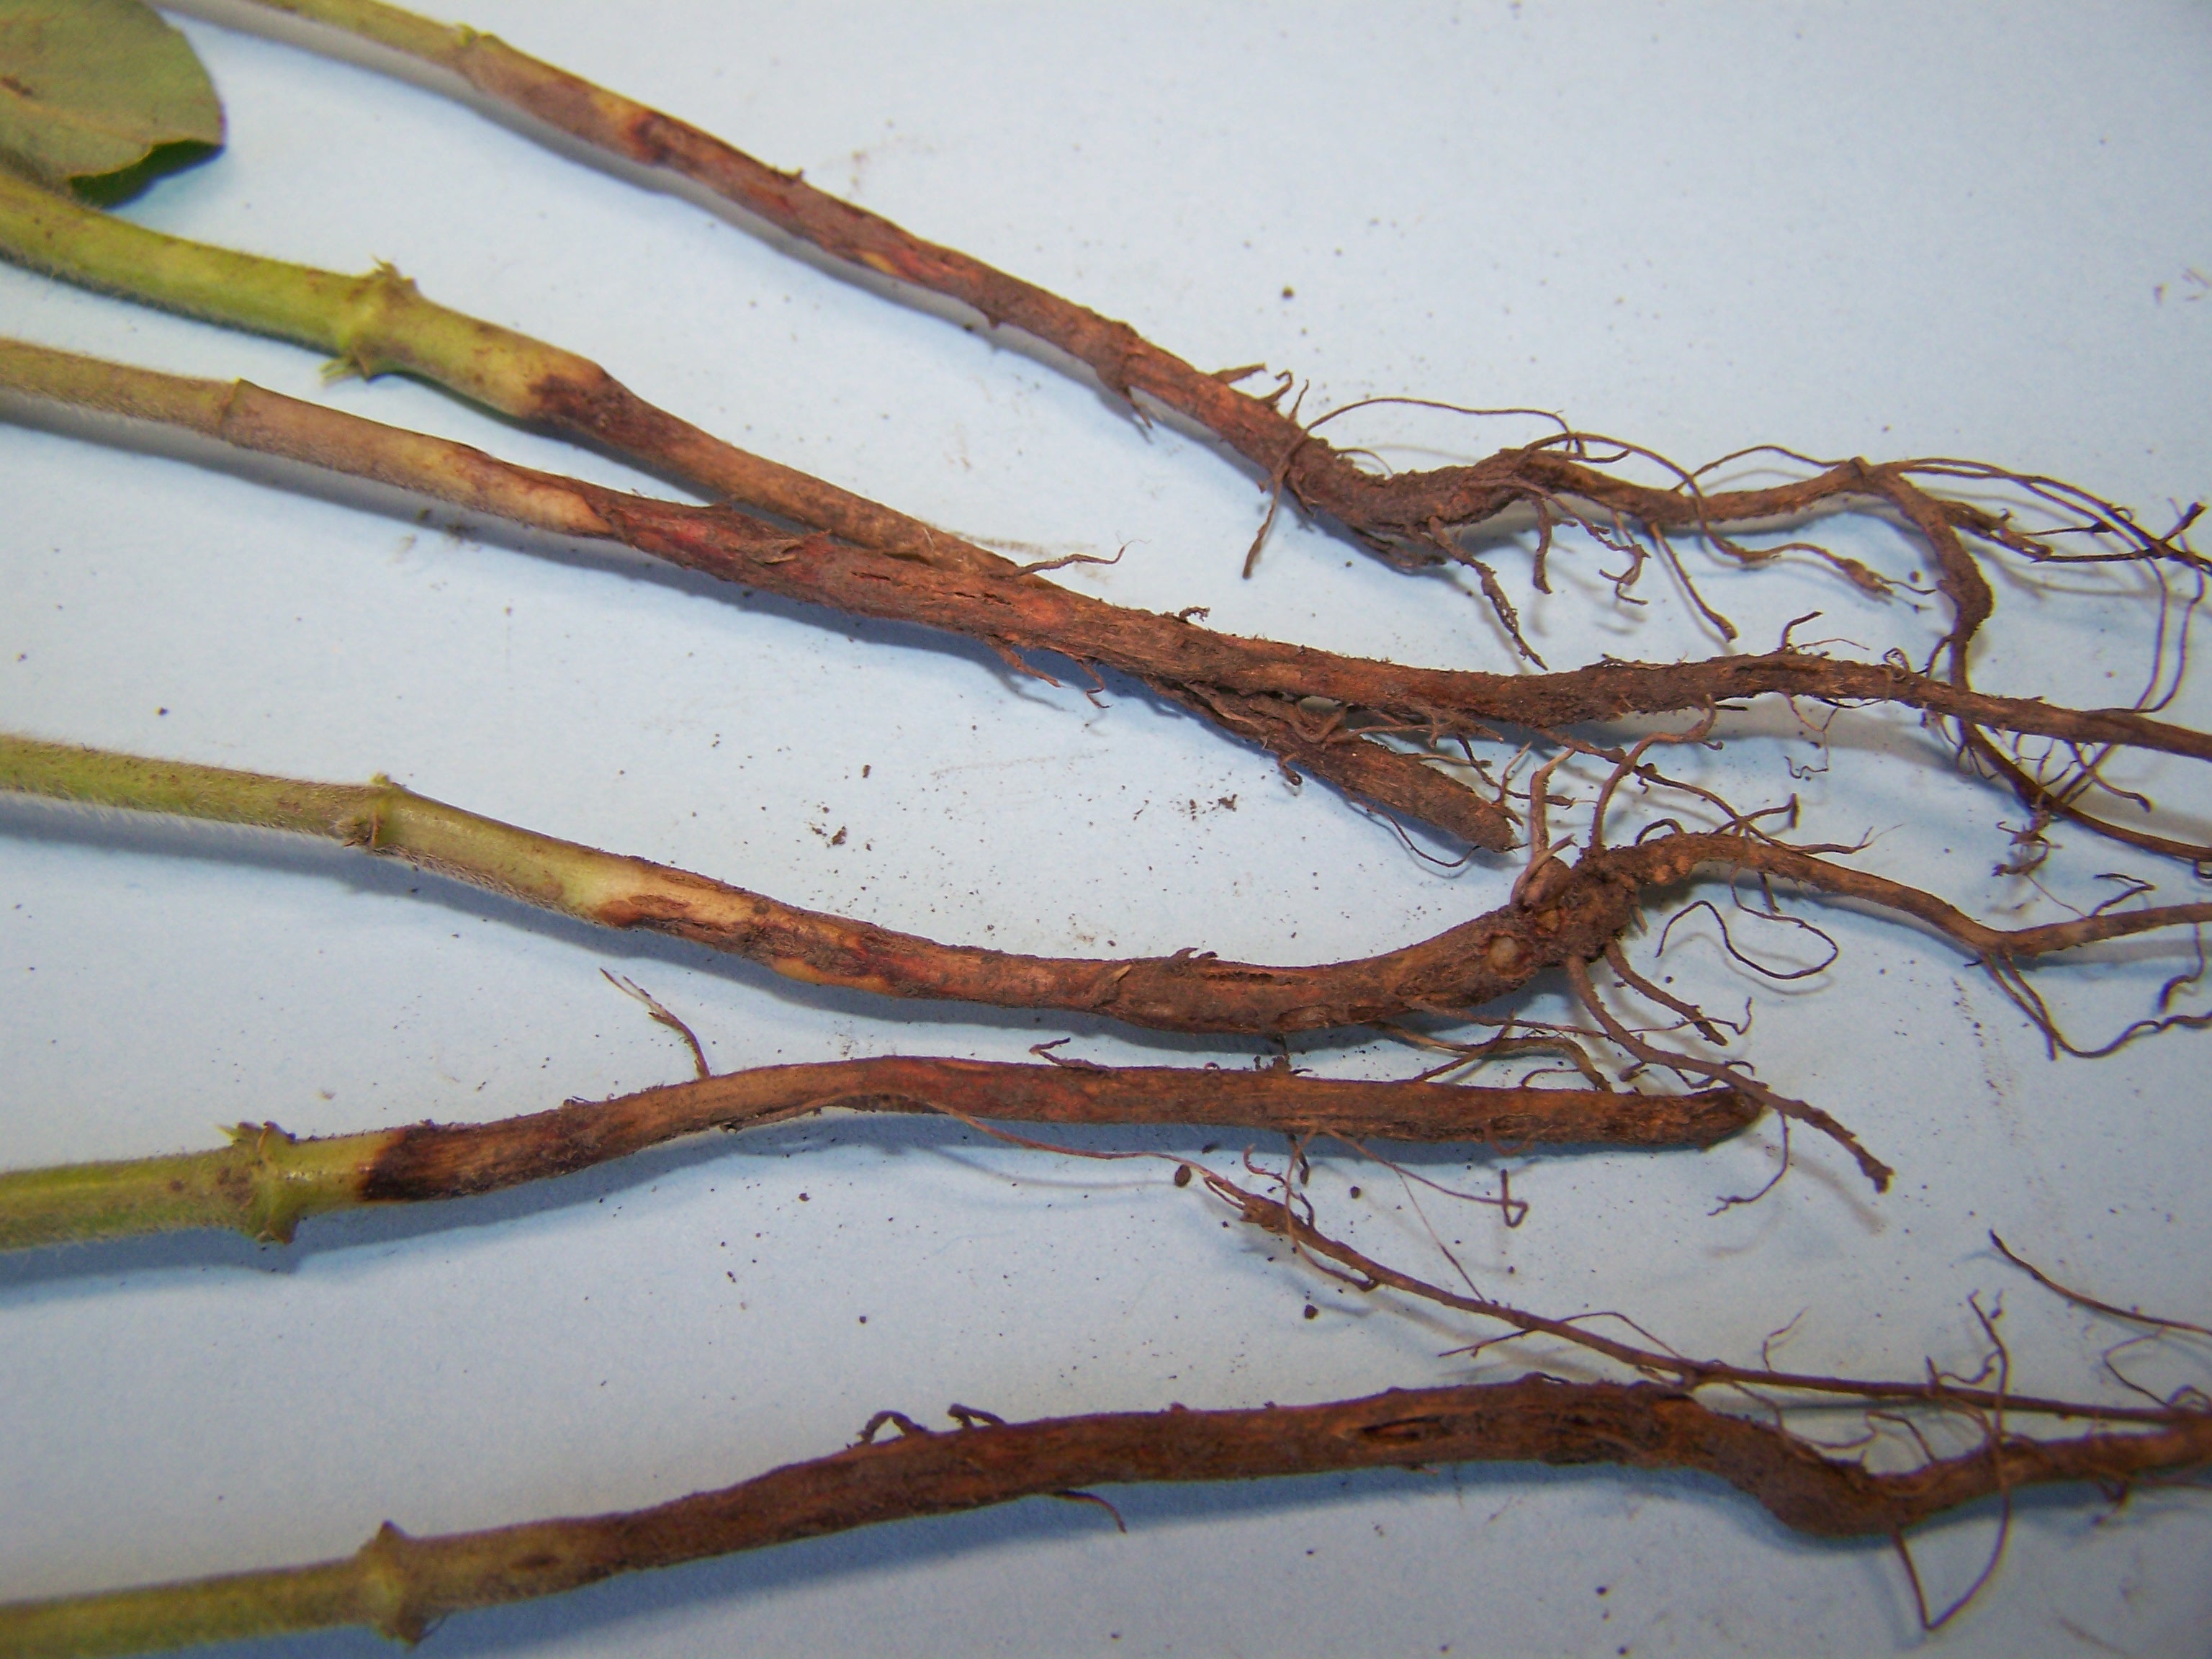 Sunken, dry lesions near the soil line characteristic of Rhizocotonia seedling blight and root rot.